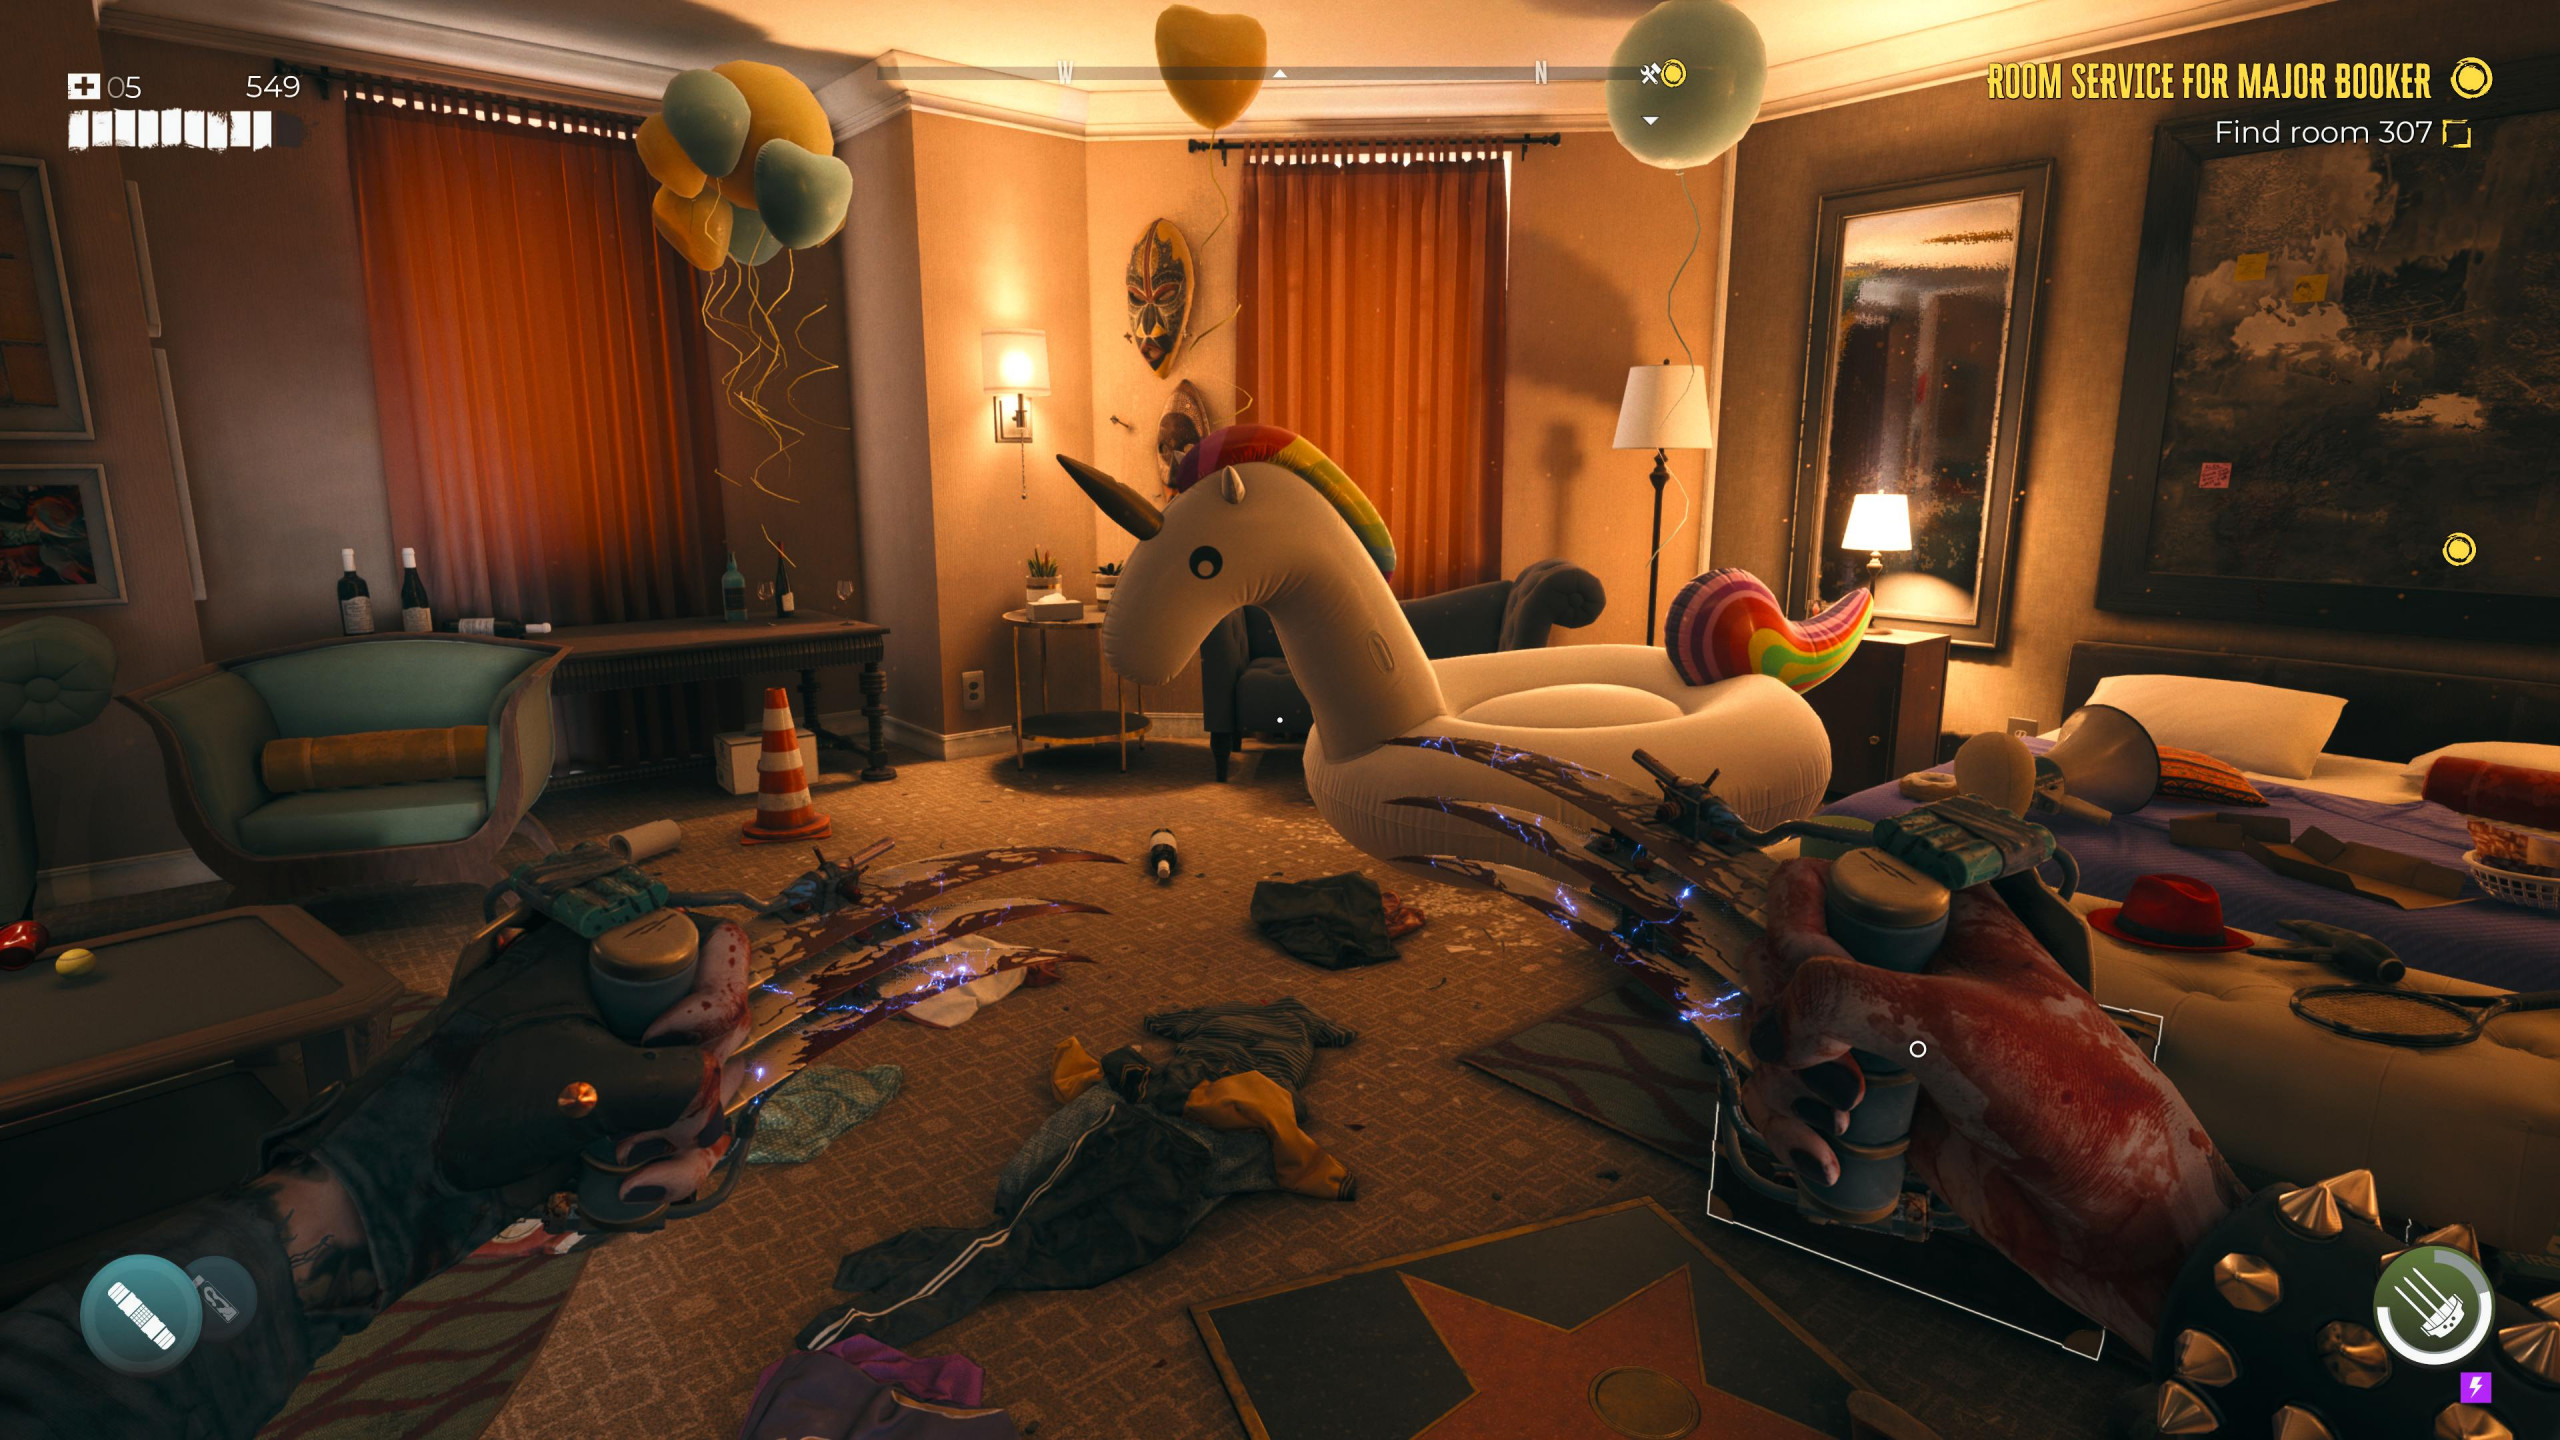 a inflatable unicorn in the middle of a rubbish strewn room with party balloons on the ceiling. Your character has some wolverine style claws as weapons.